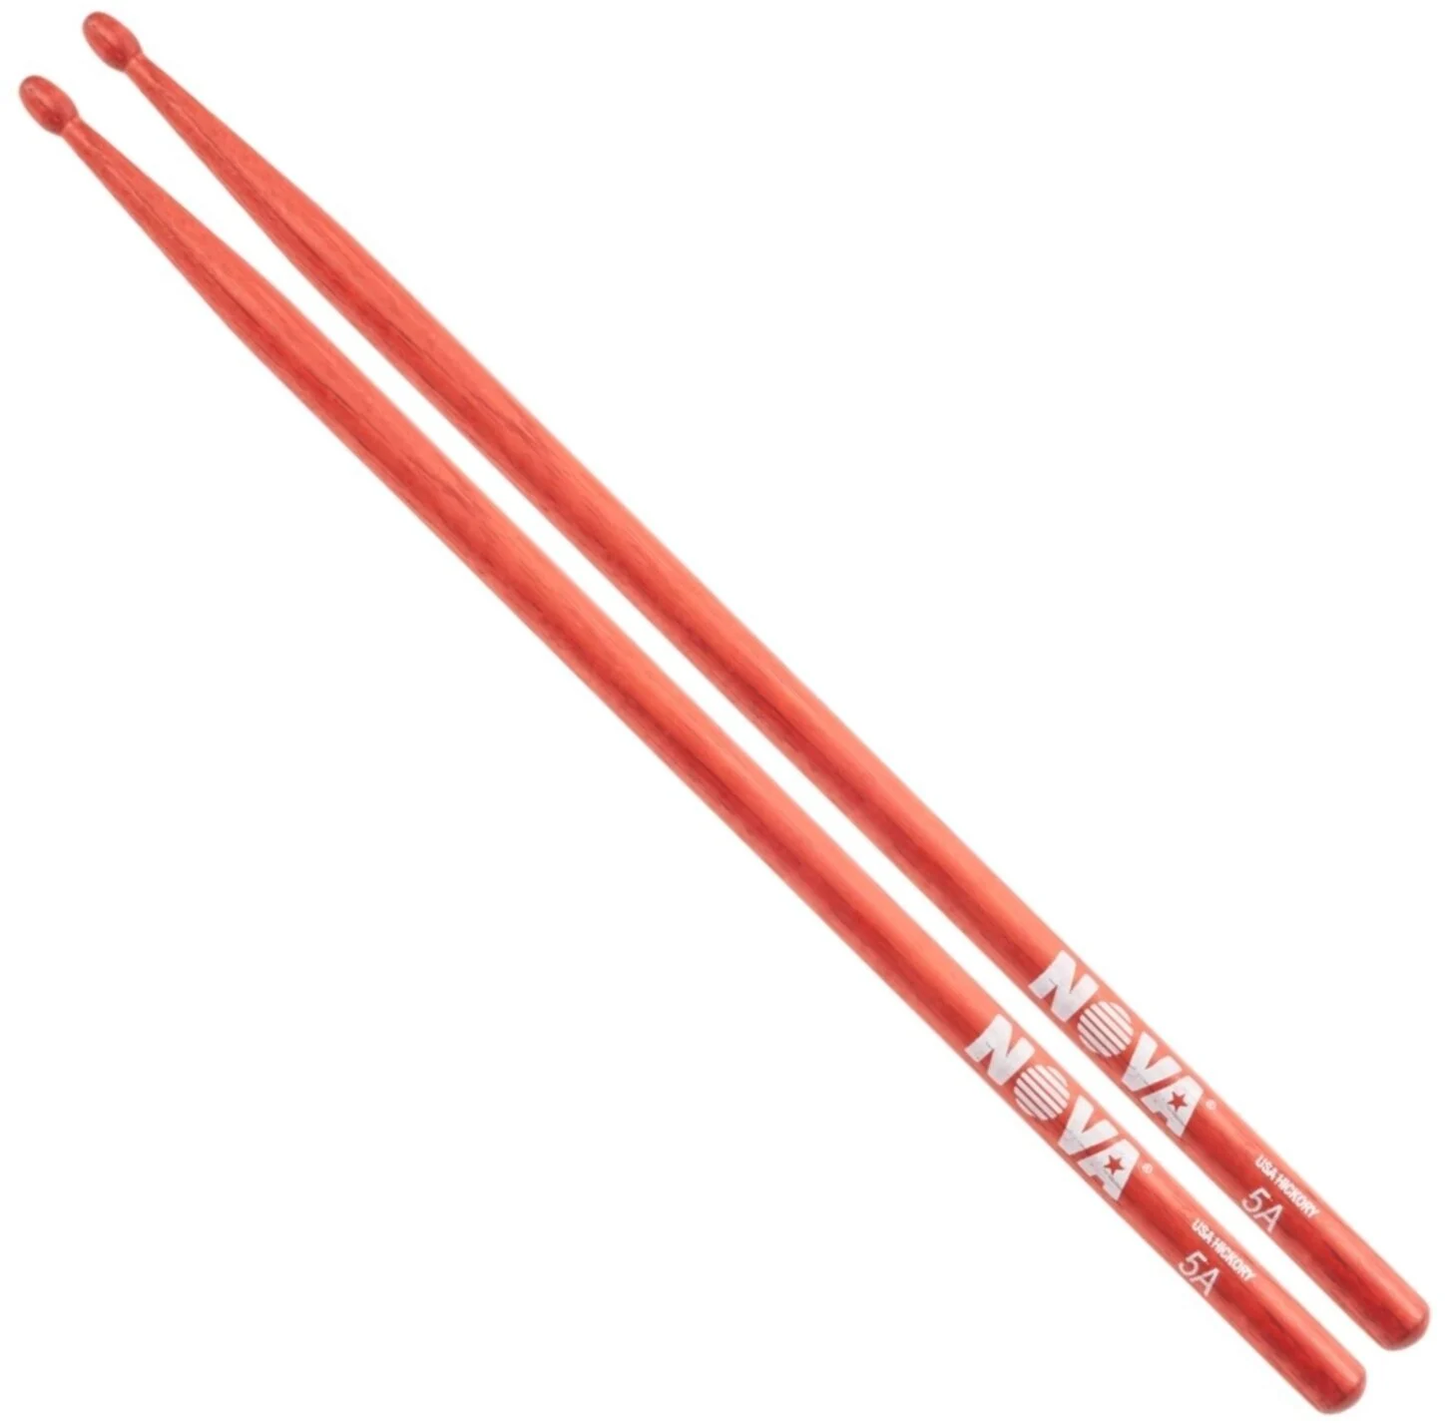 Vic Firth Nova N5A Hickory Wood Drumsticks (Pair) Drum Sticks for Drums and Percussion (Natural, Black, Red)